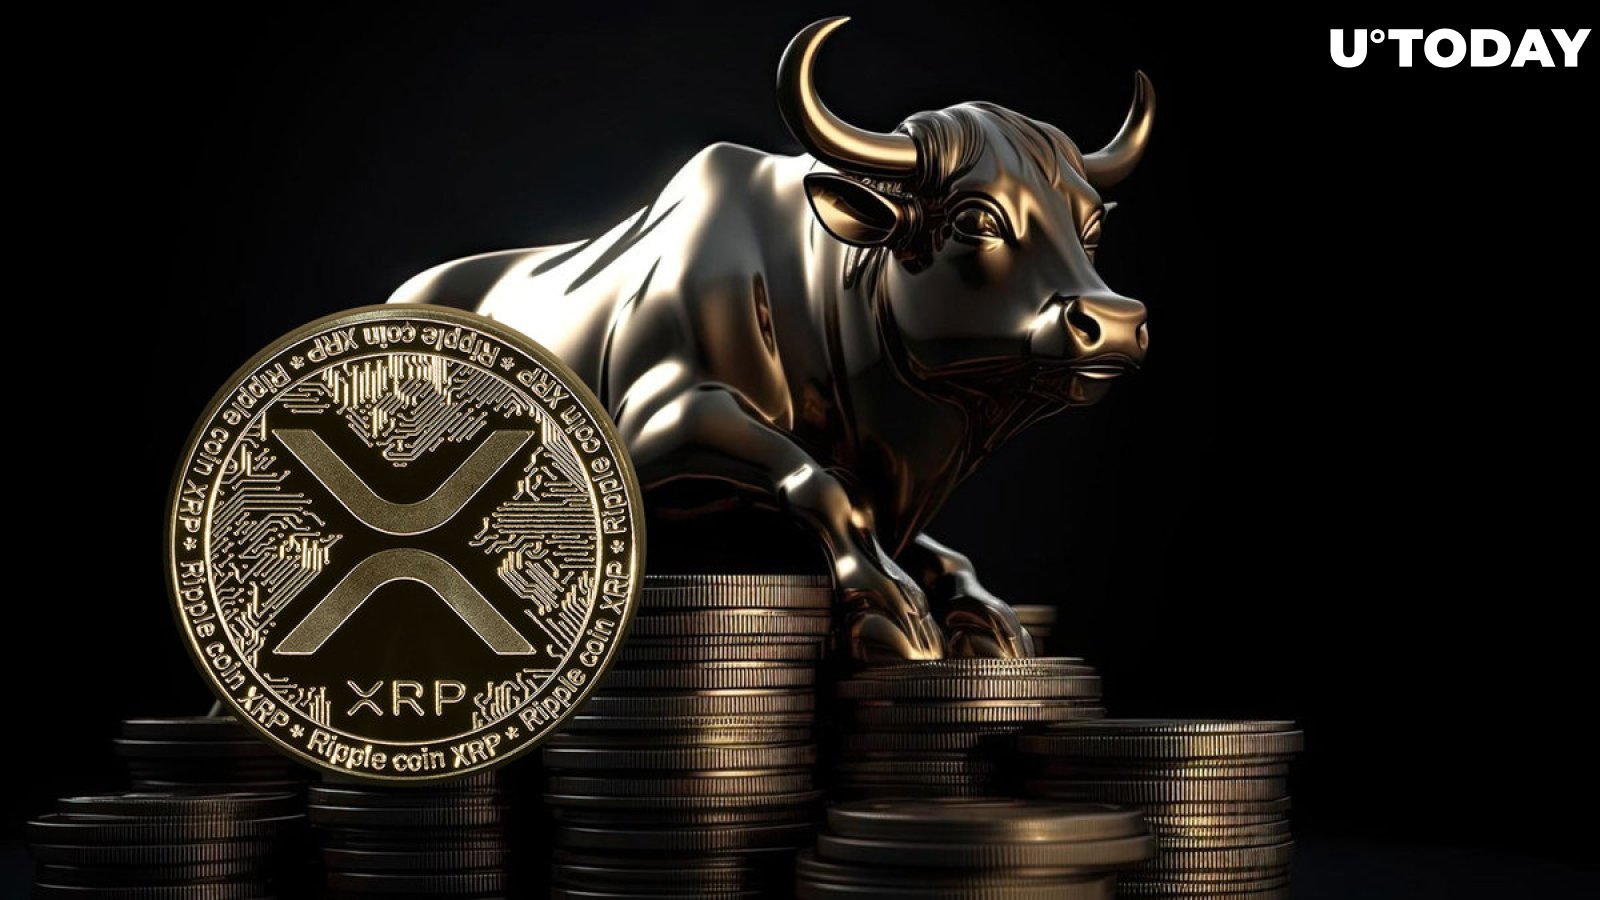 XRP Finally Pumps and Enters Bull Market